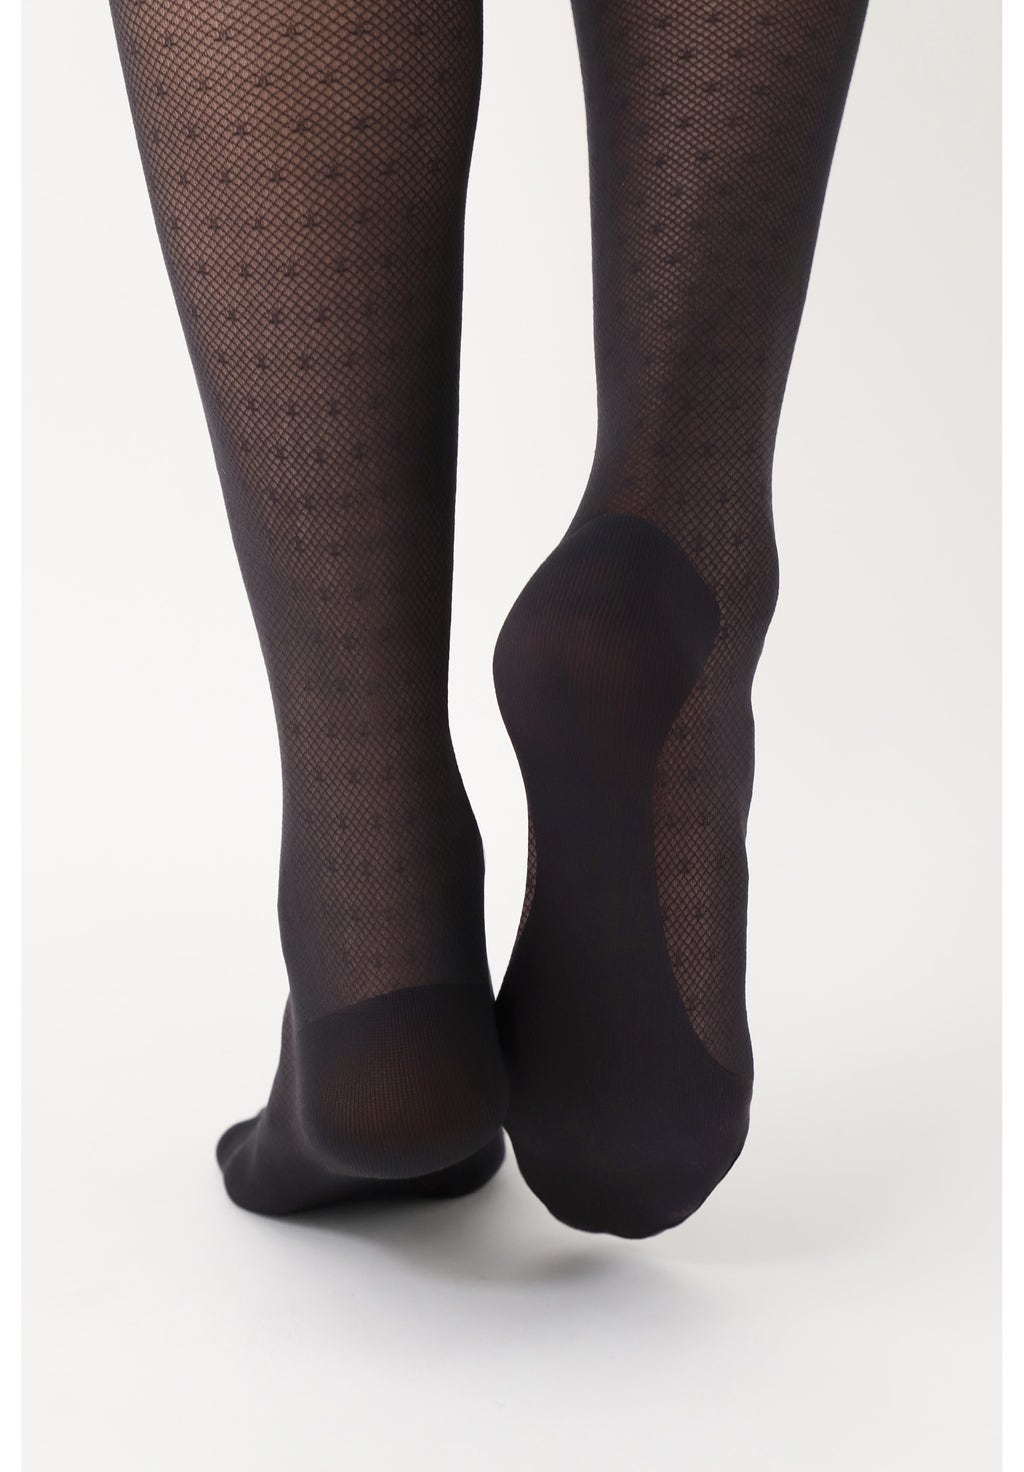 OroblÌ_ Eco Sneaker Tights - Black micro mesh recycled tights with a polka dot spot pattern